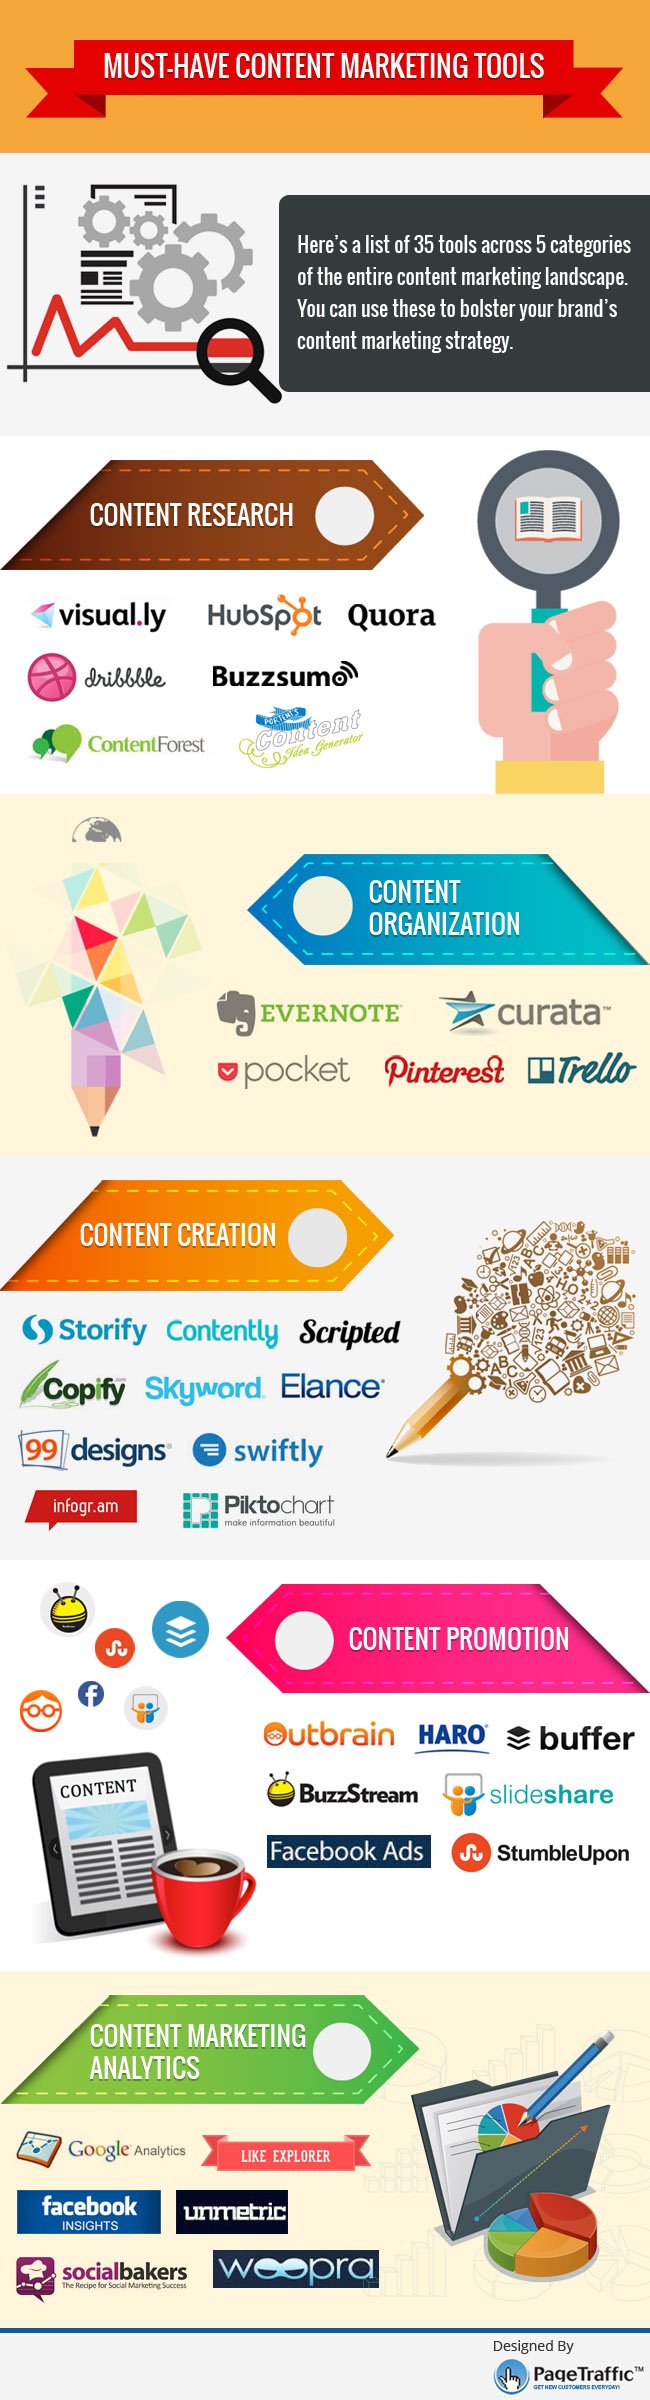 Infographic: Must-Have Content Marketing Tools